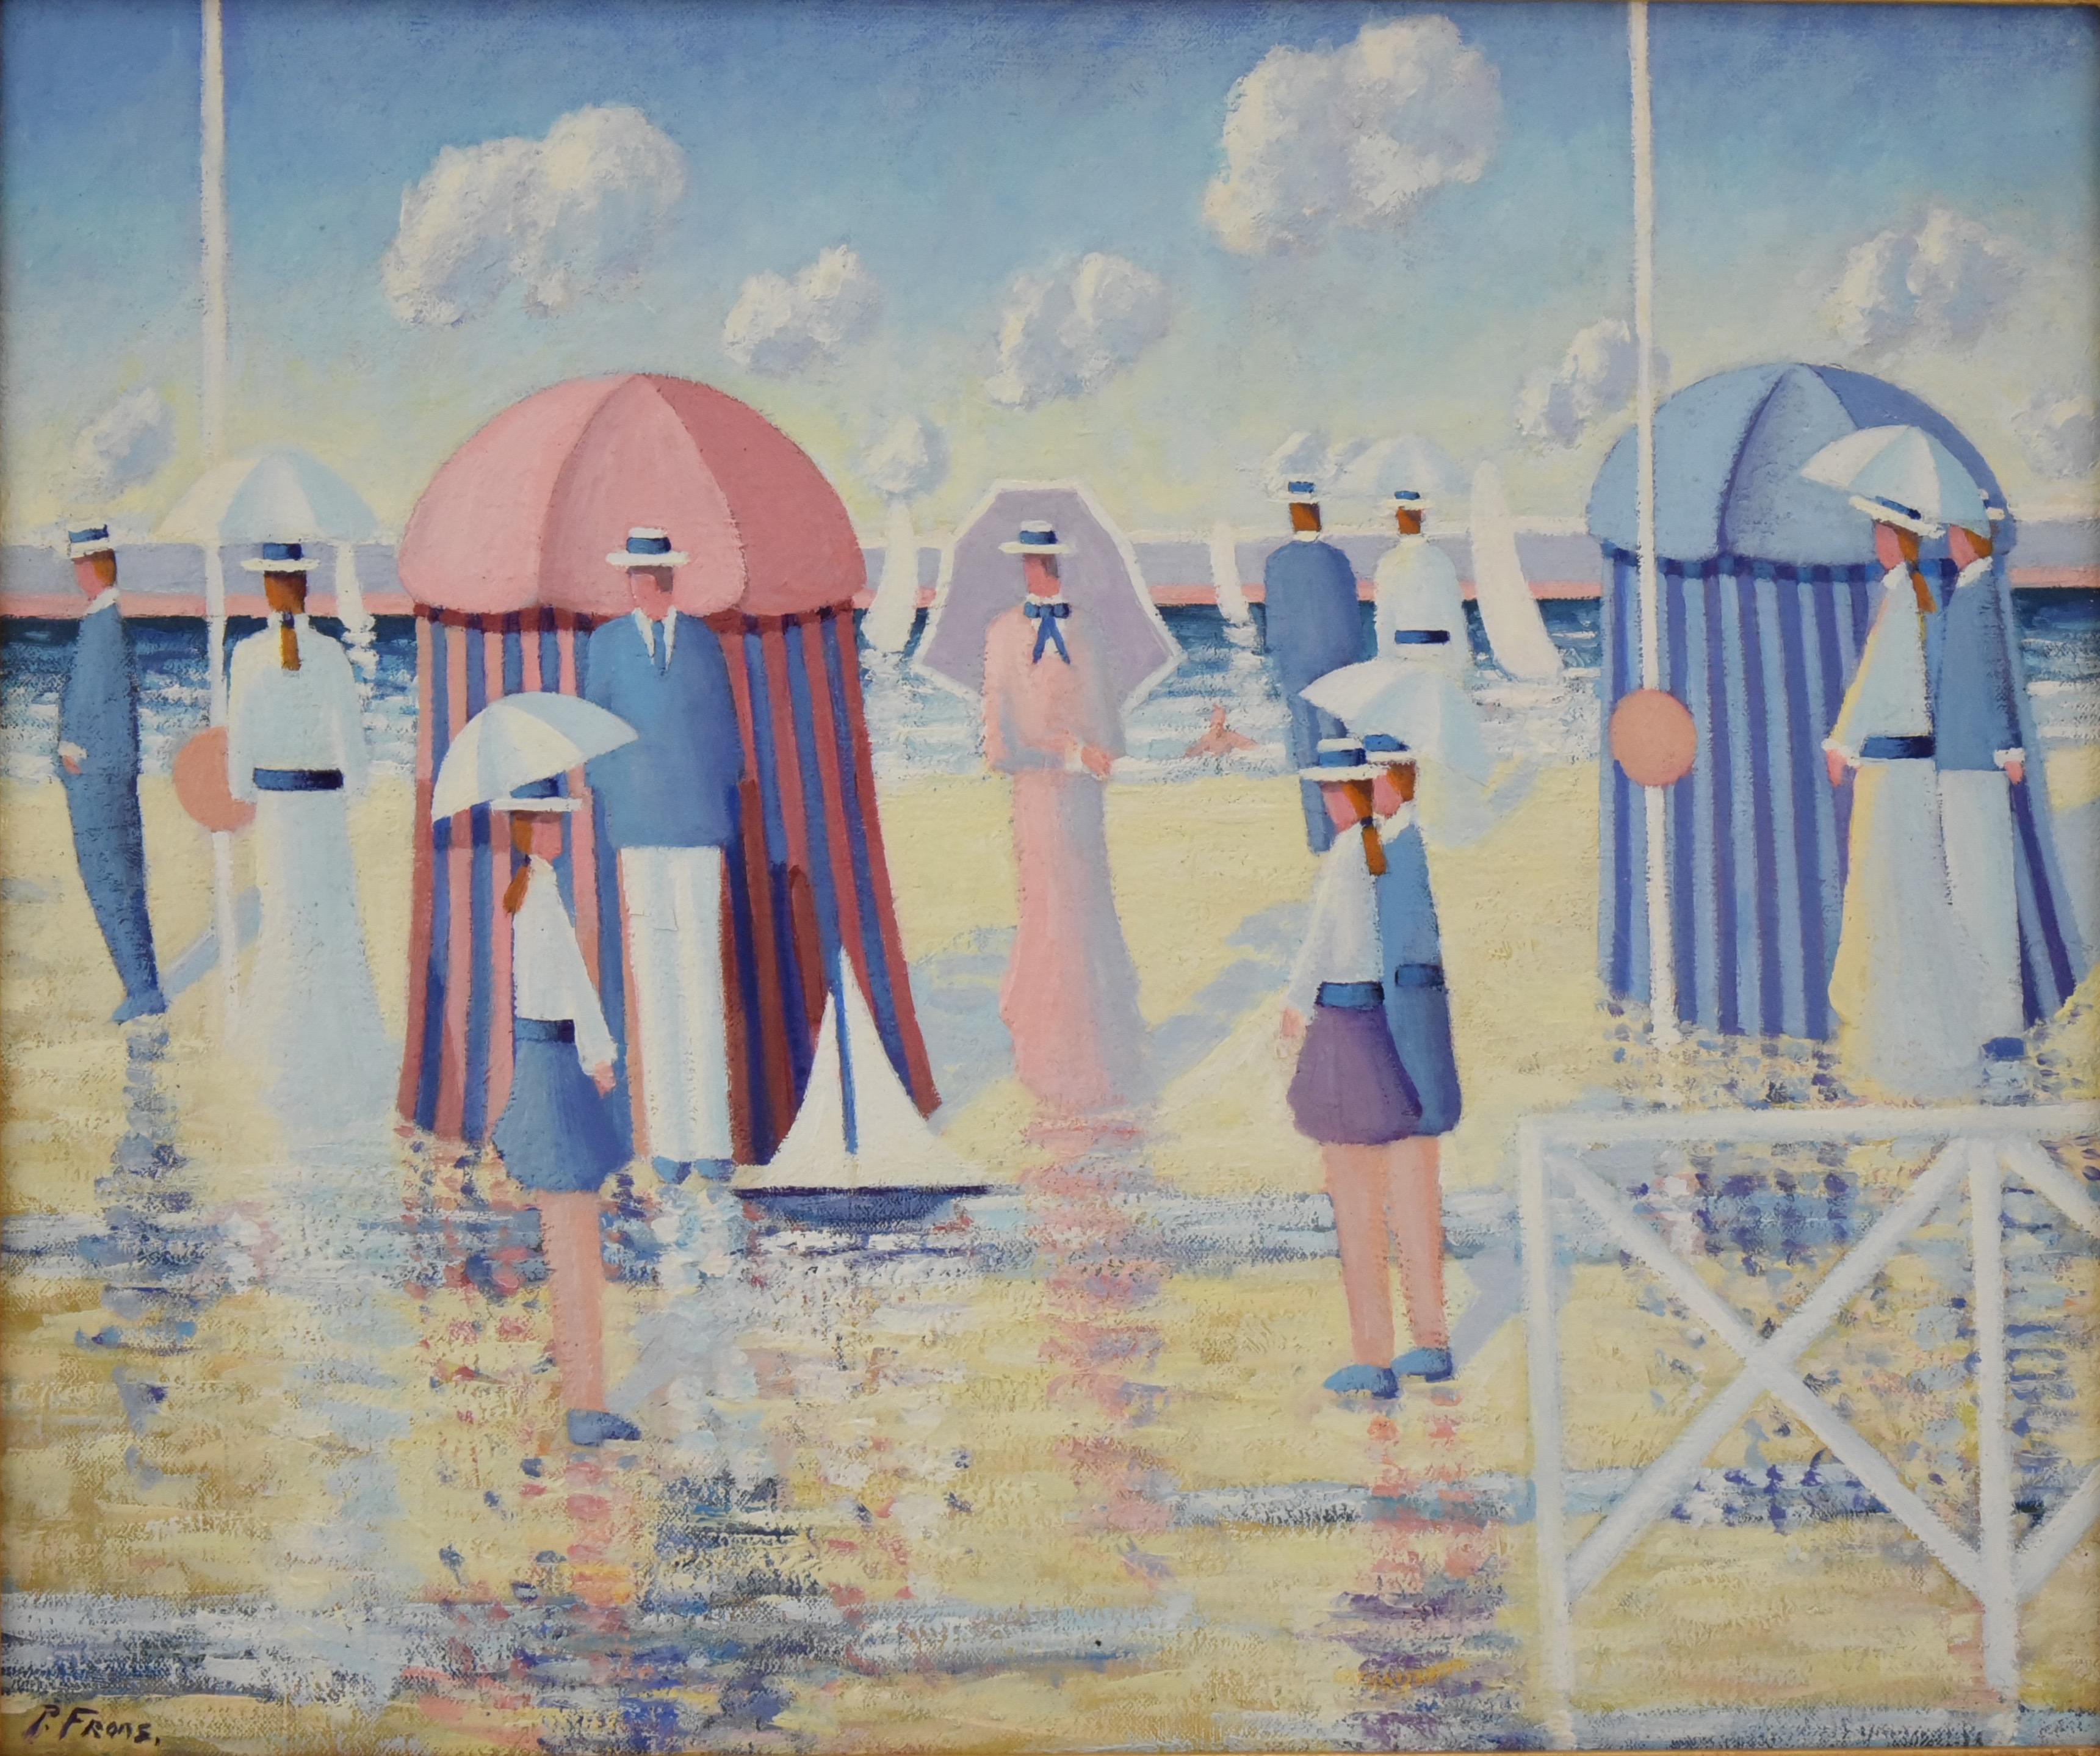 Painting people on the beach with cabins. 
By the Belgian painter Paul Frans (1958)
The work has beautiful pastel colors.
Titled: Les Cabannes. 
Size of the frame: 
H. 69 cm x L. 78.5 cm. x D. 3 cm. 
H. 27.2 inch x L. 30.9 inch. x W. 1.2 inch.